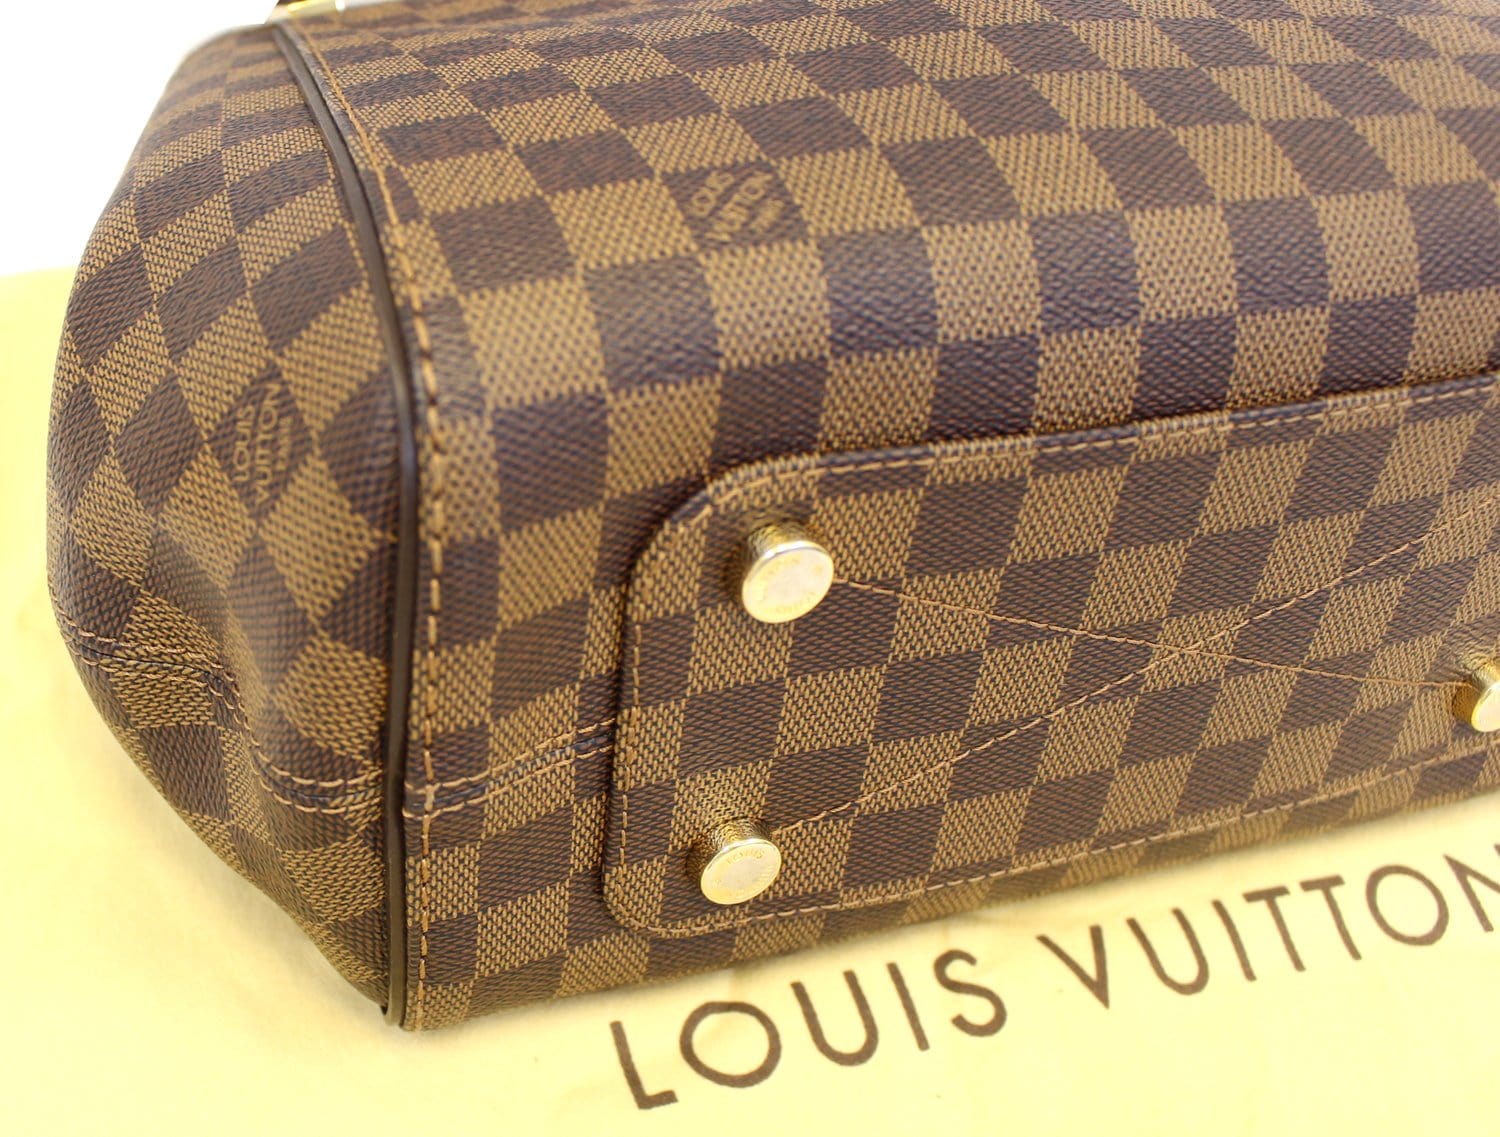 LOUIS VUITTON Epi Monceau Black LOUIS VUITTON Damier Ebene Nolita LOUIS  VUITTON Damier Ebene Brera You're invited to countless compliments…